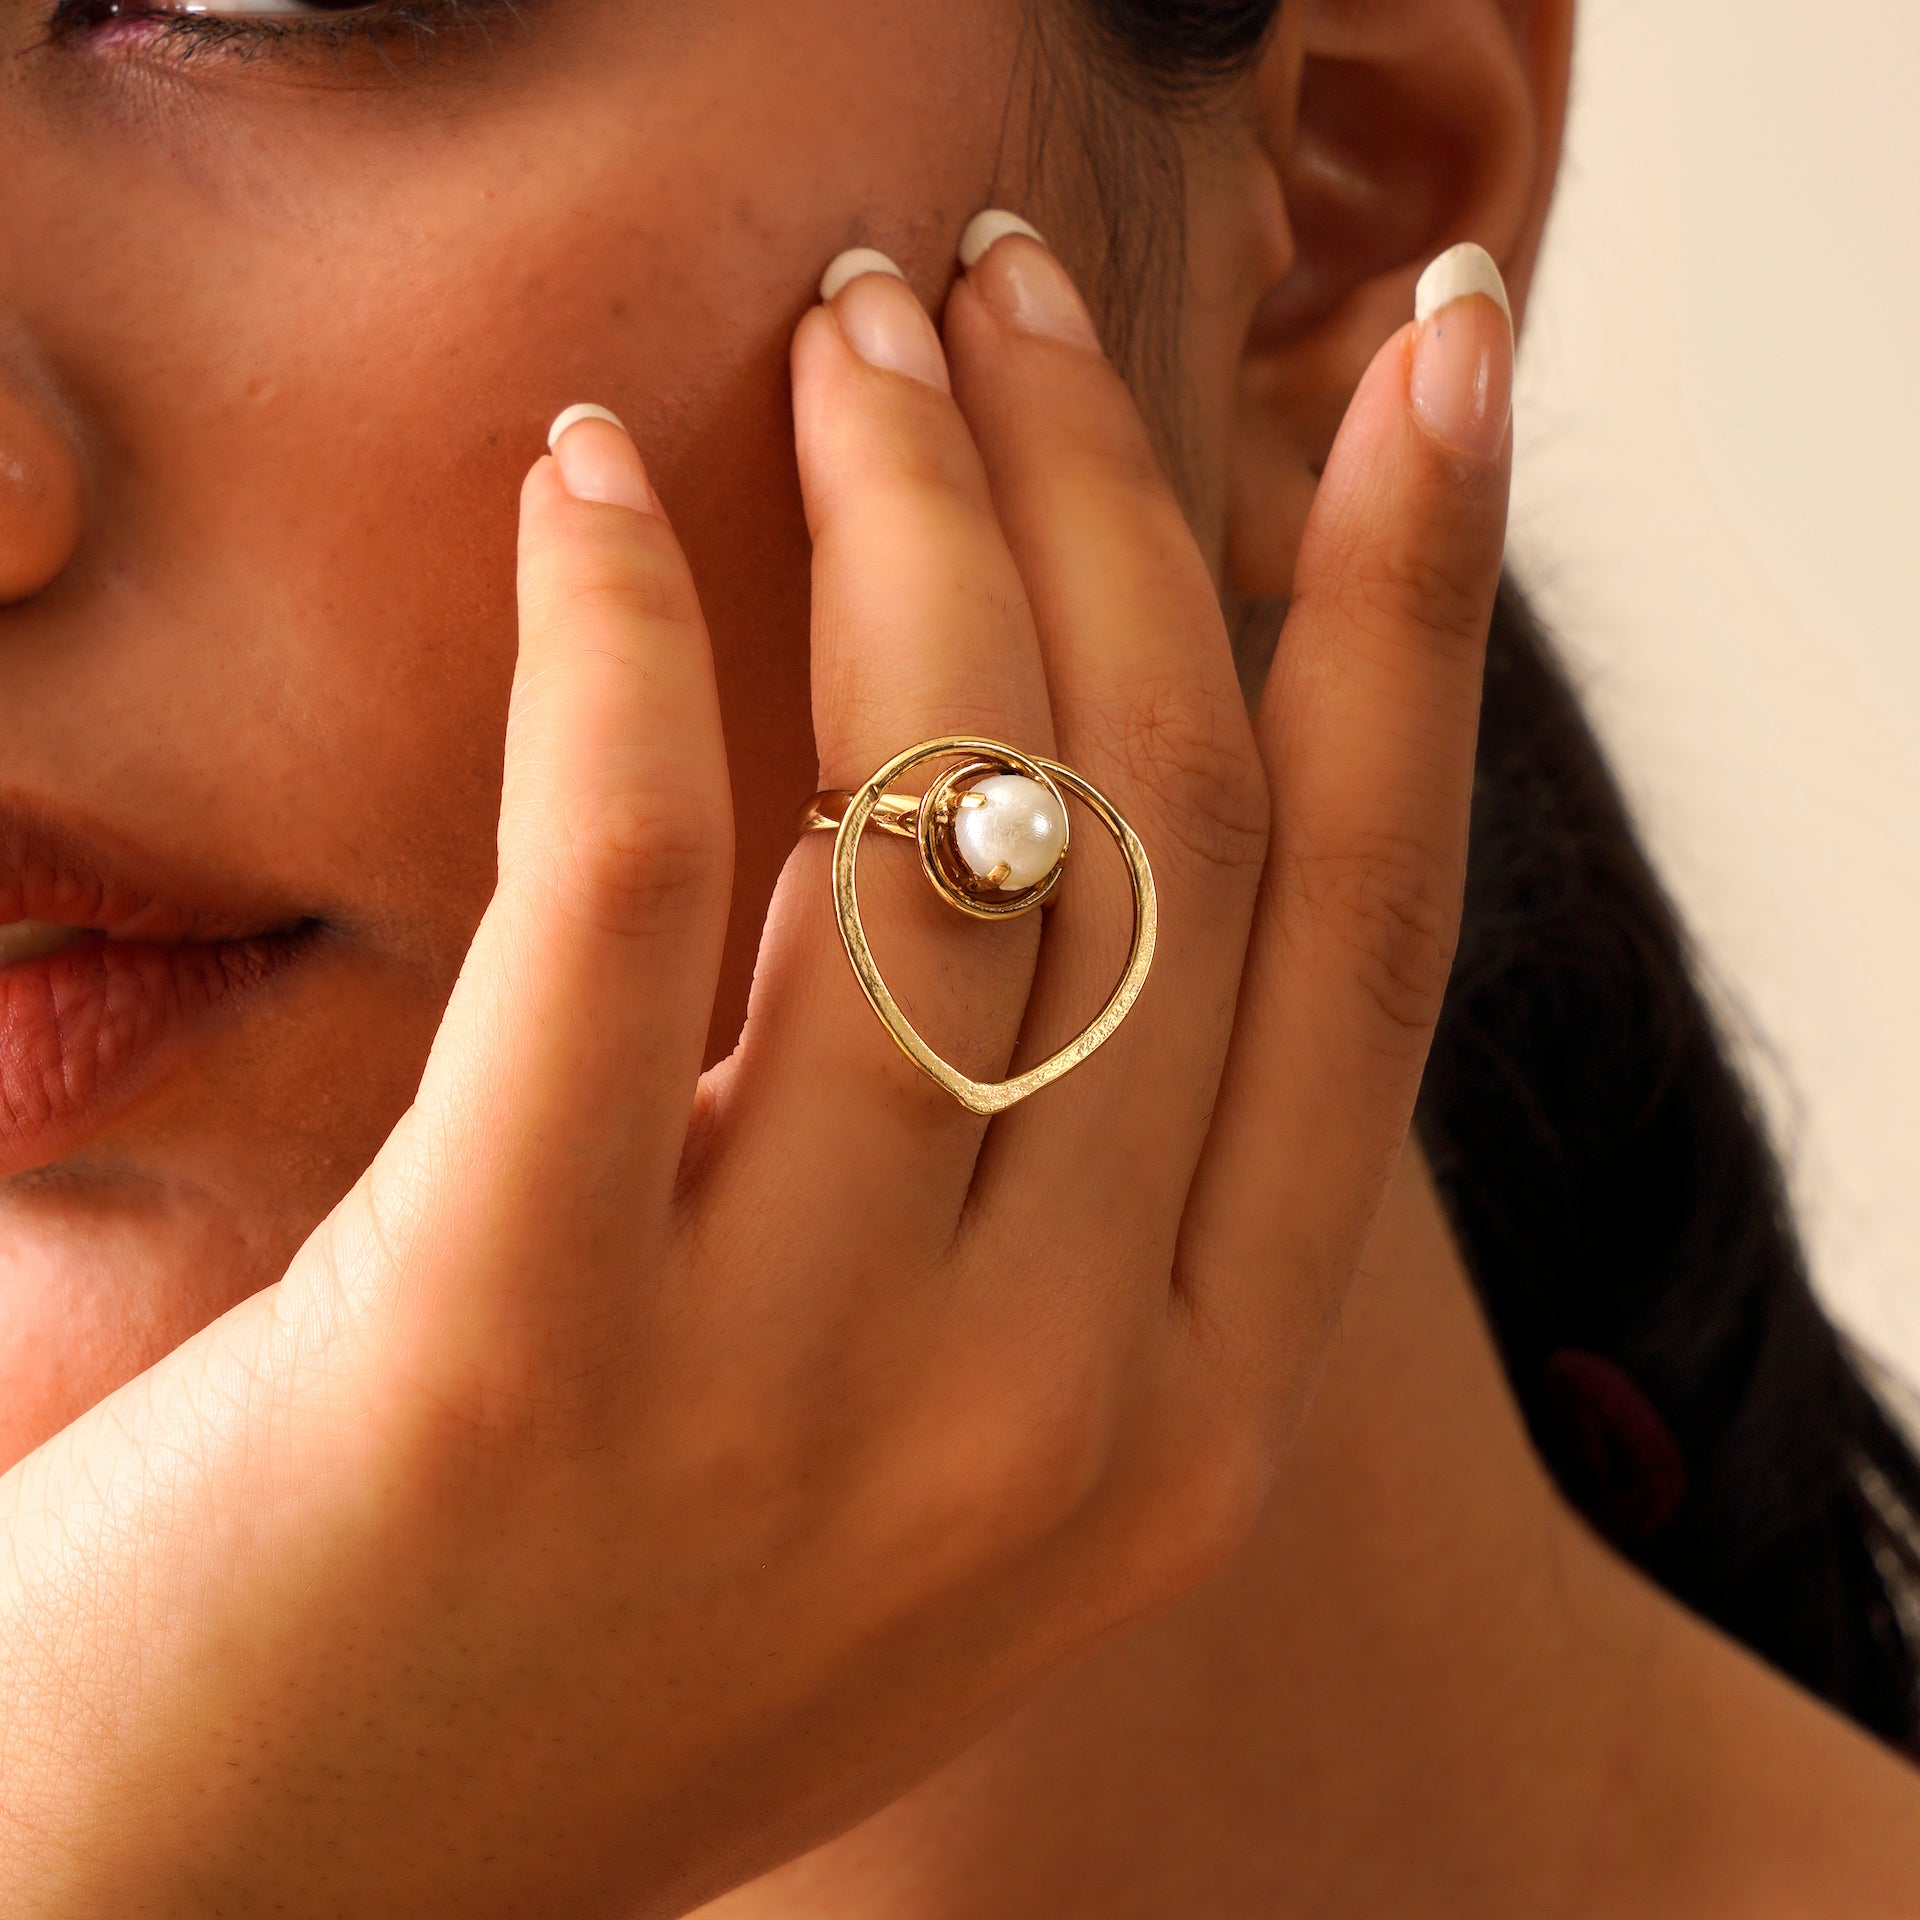 TFC Hearty Love gold plated adjustable ring-Elevate your style with our exquisite collection of gold-plated adjustable rings for women, including timeless signet rings. Explore cheapest fashion jewellery designs with anti-tarnish properties, all at The Fun Company with a touch of elegance